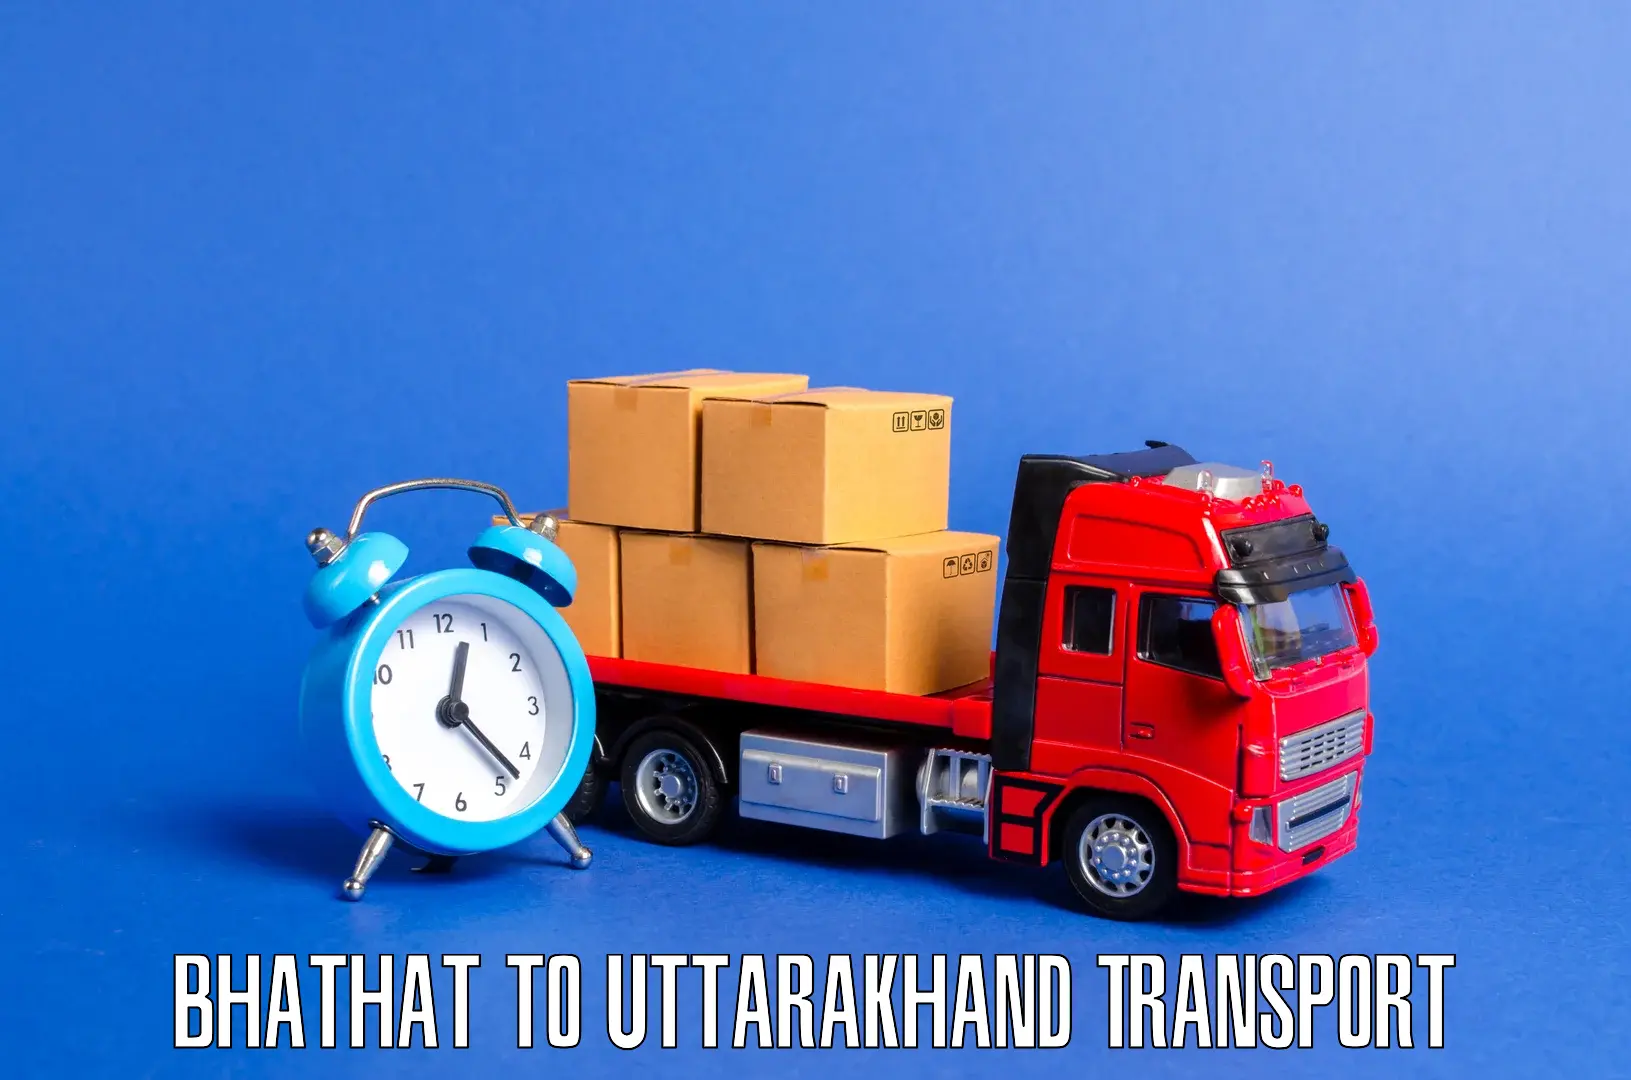 Daily parcel service transport Bhathat to Pithoragarh